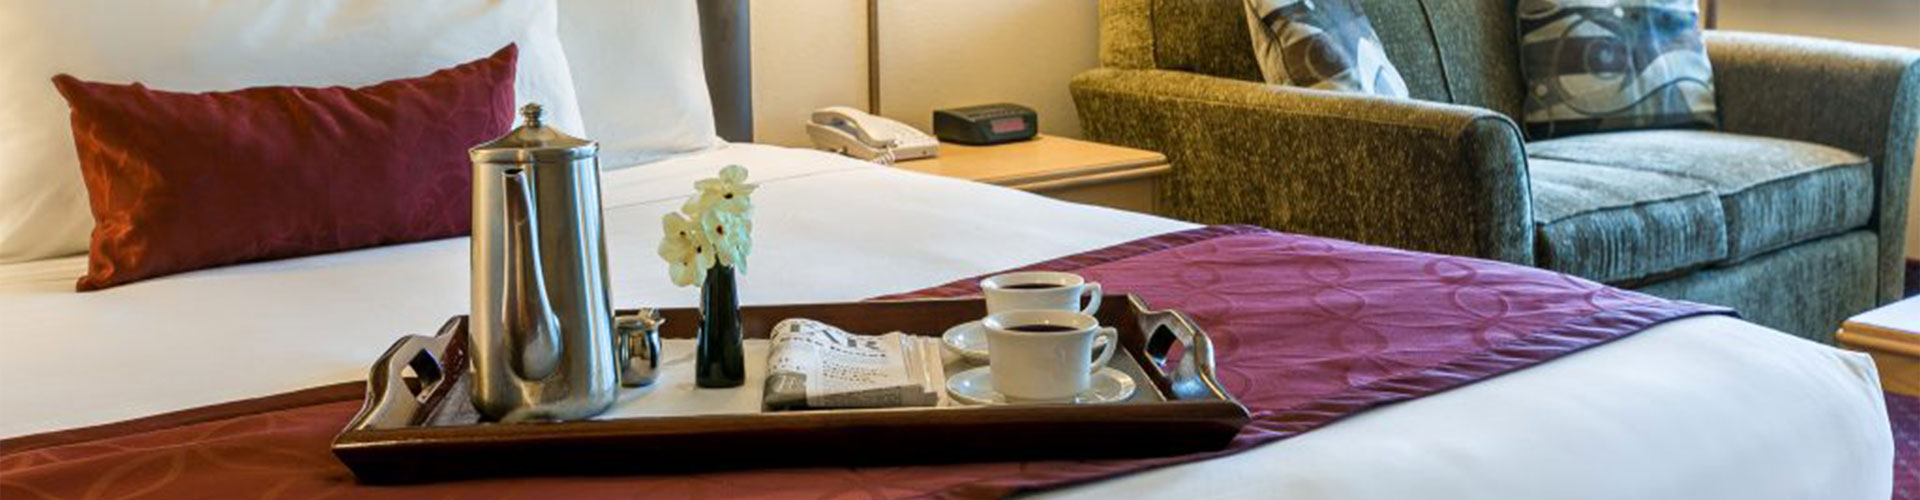 A bed in a hotel room with a tray.